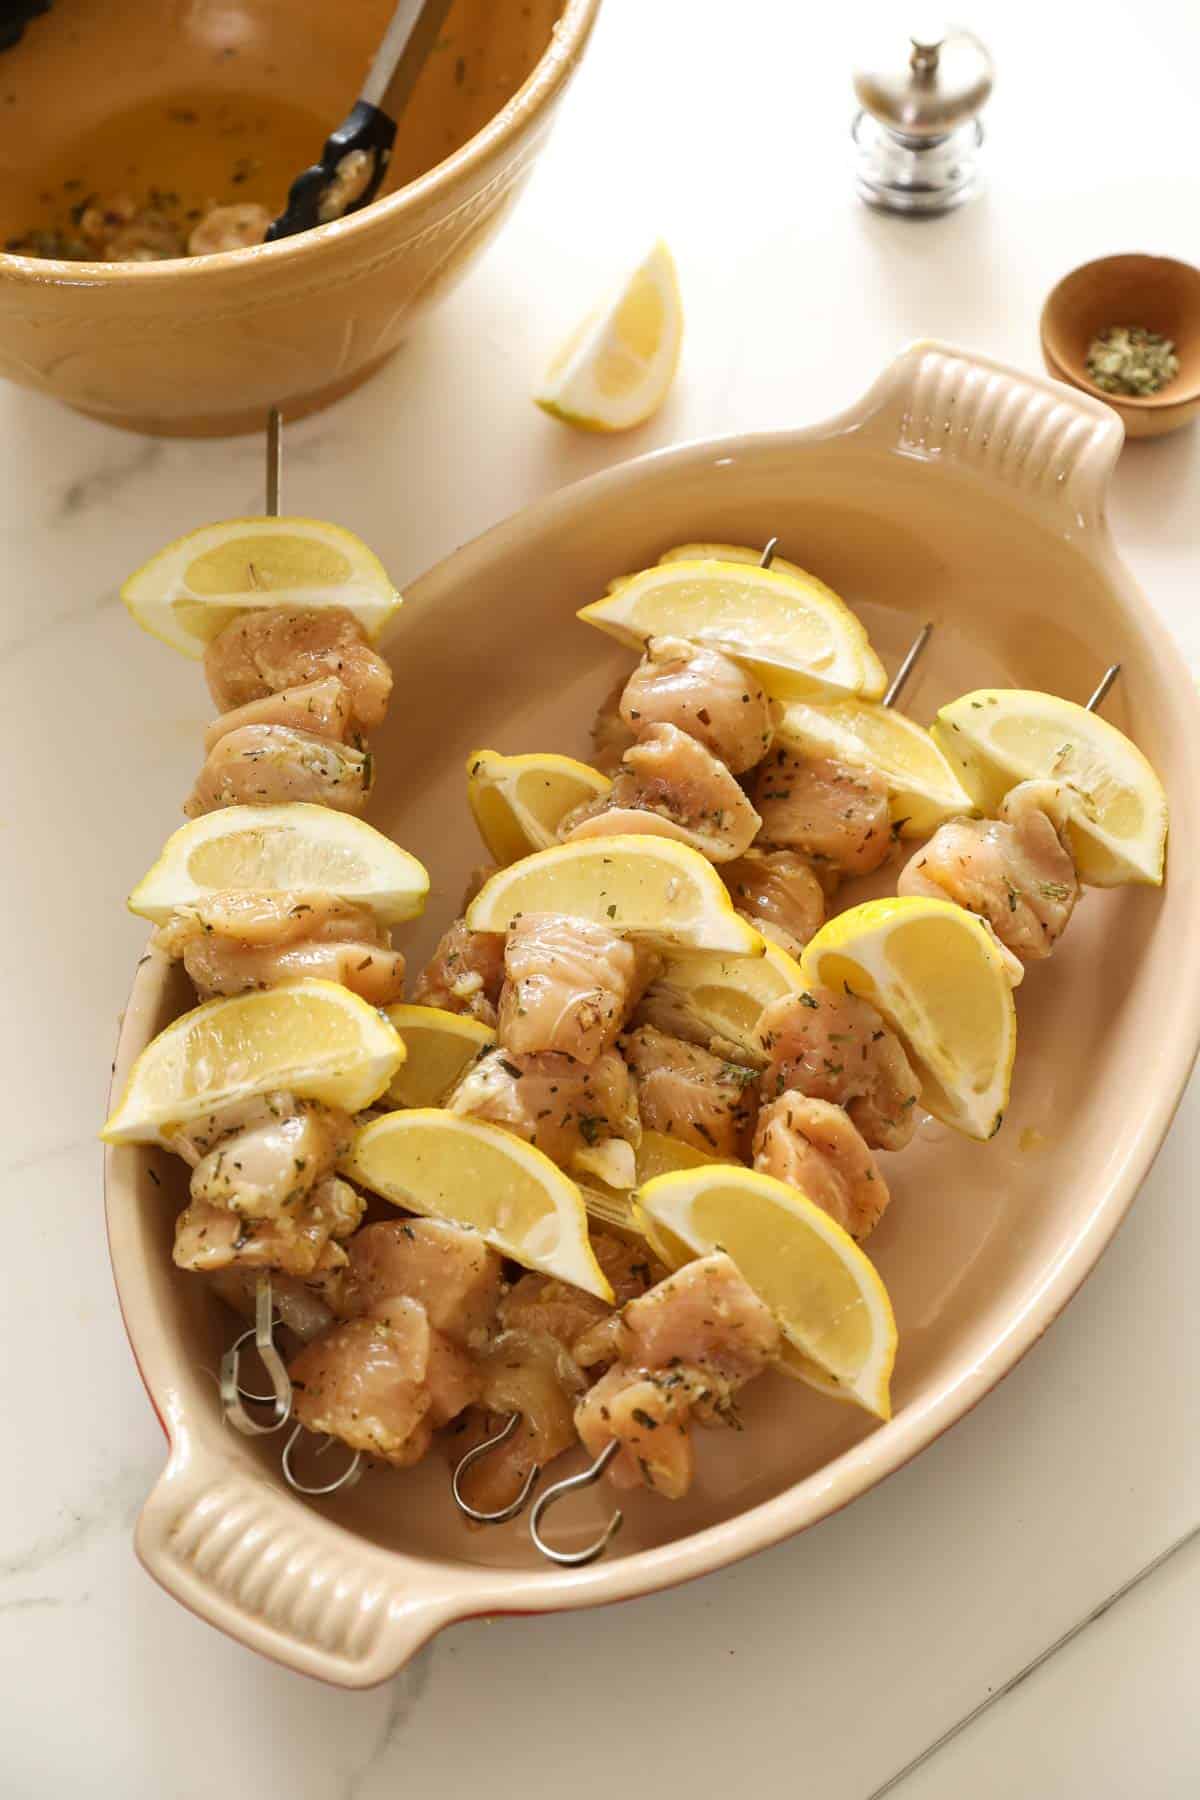 Raw chicken brochettes threaded with lemon slices